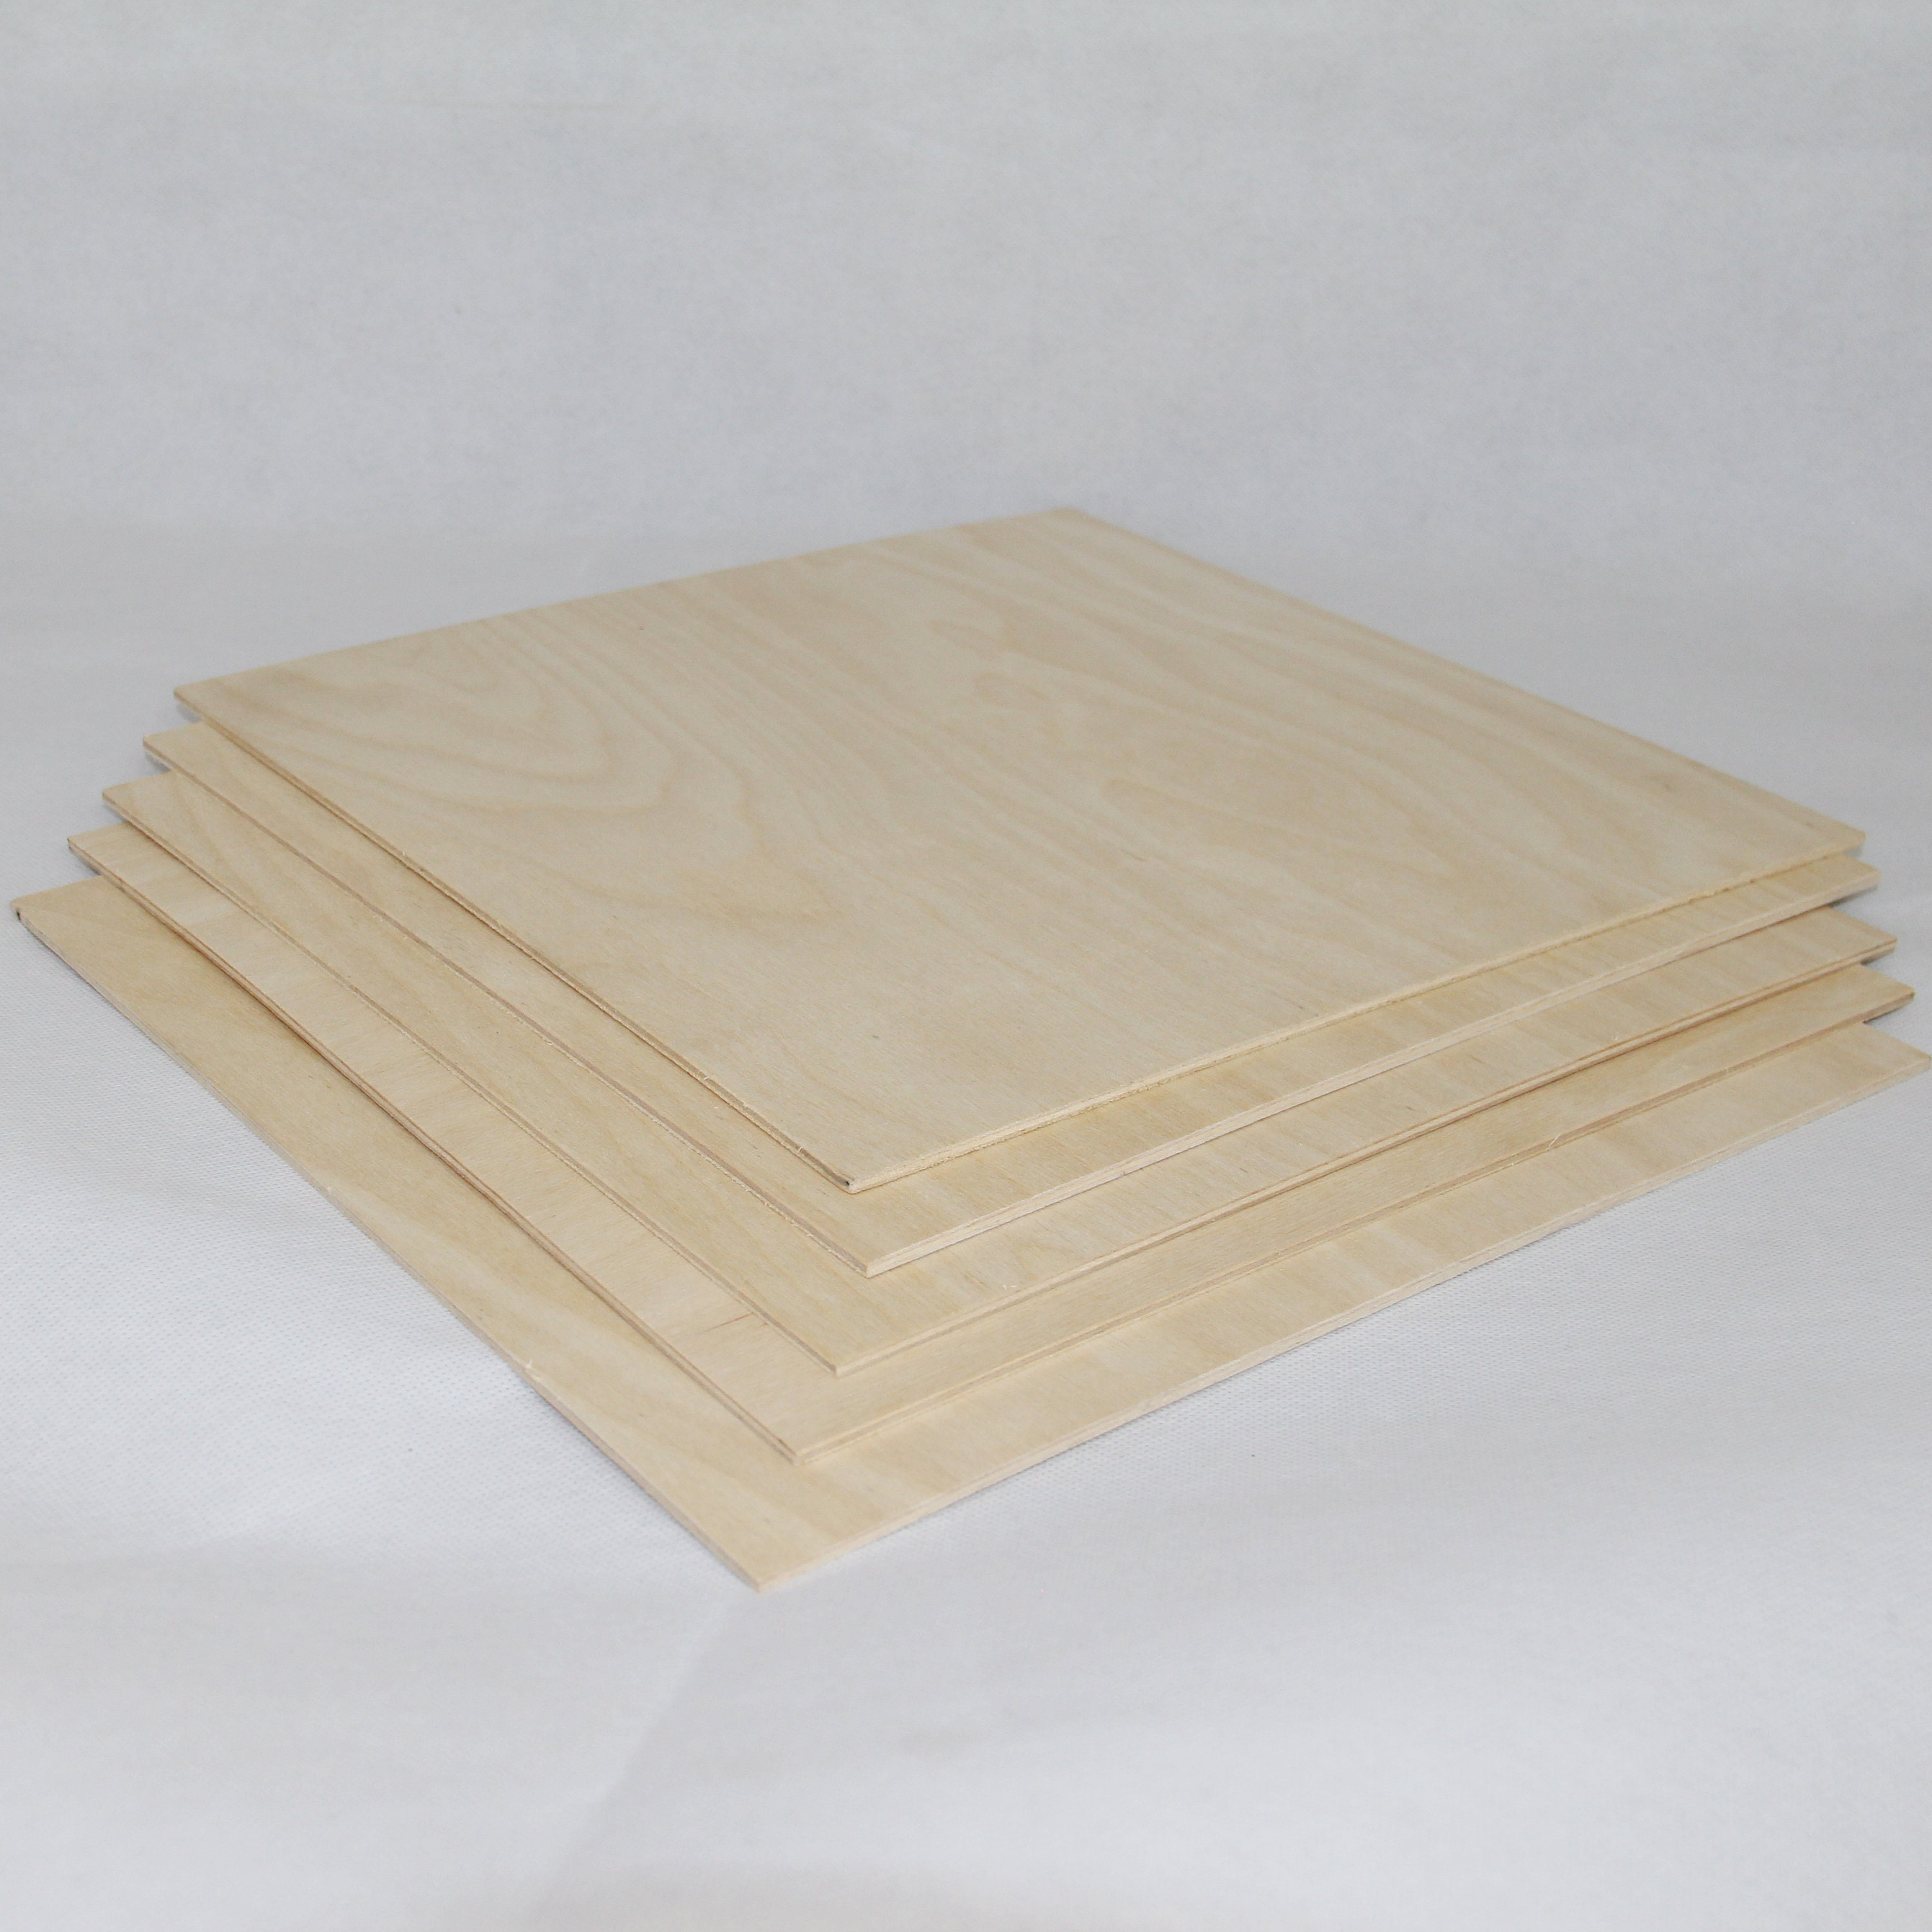 12 Pack Basswood Sheets 1/8 x 12 x 12 Inch Plywood Board, Thin Natural  Unfinished Wood for Crafts, - Message Boards & Holders, Facebook  Marketplace